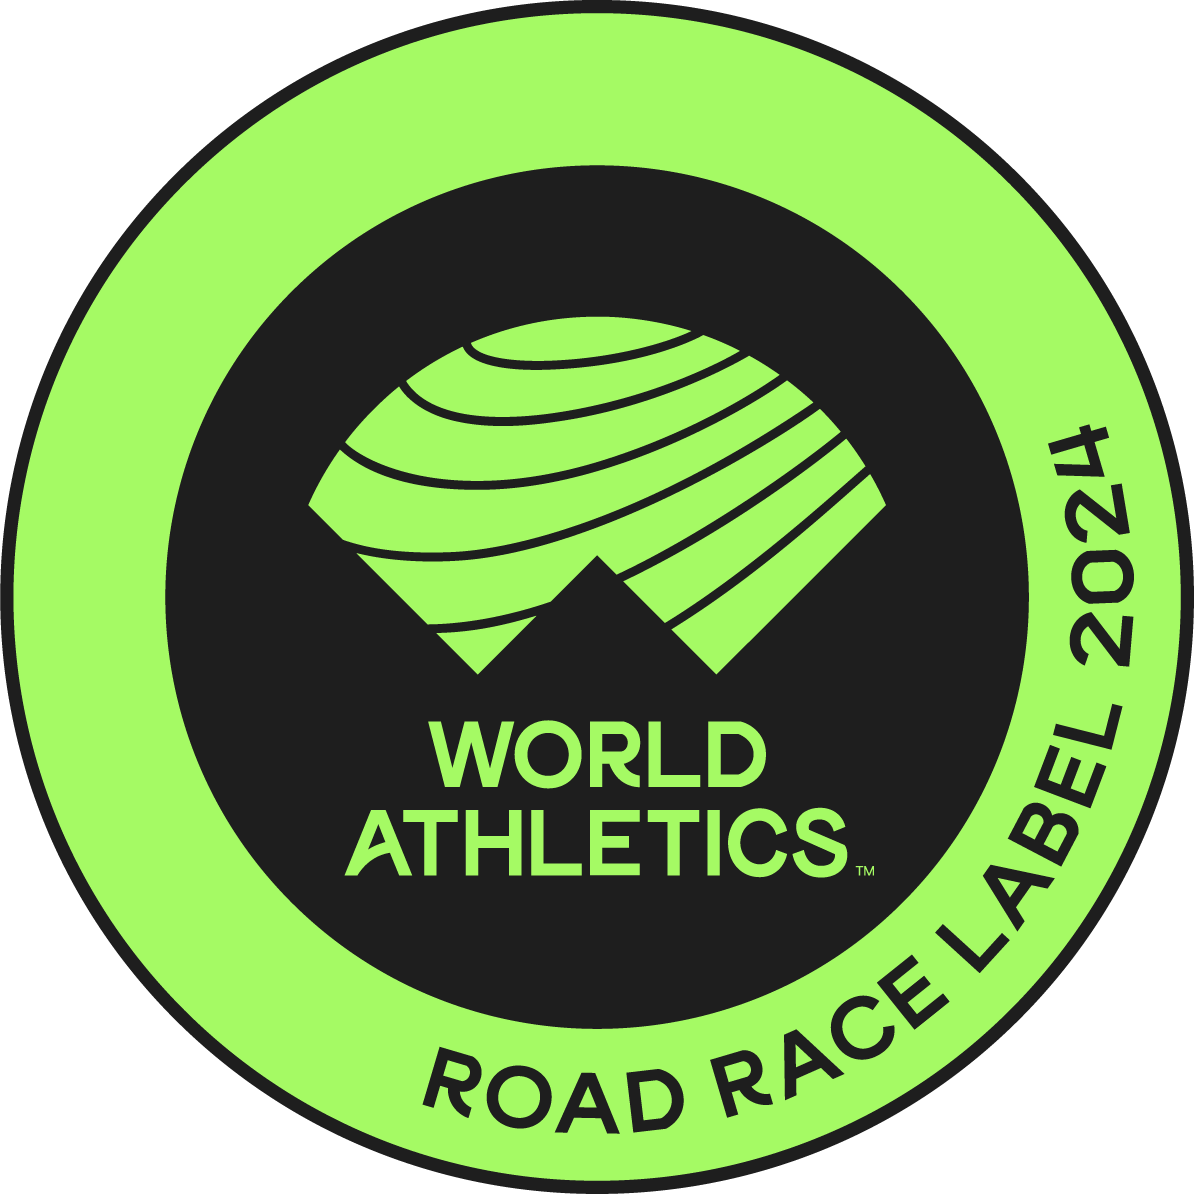 SANCTIONED & SUPPORTED BY WORLD ATHLETICS